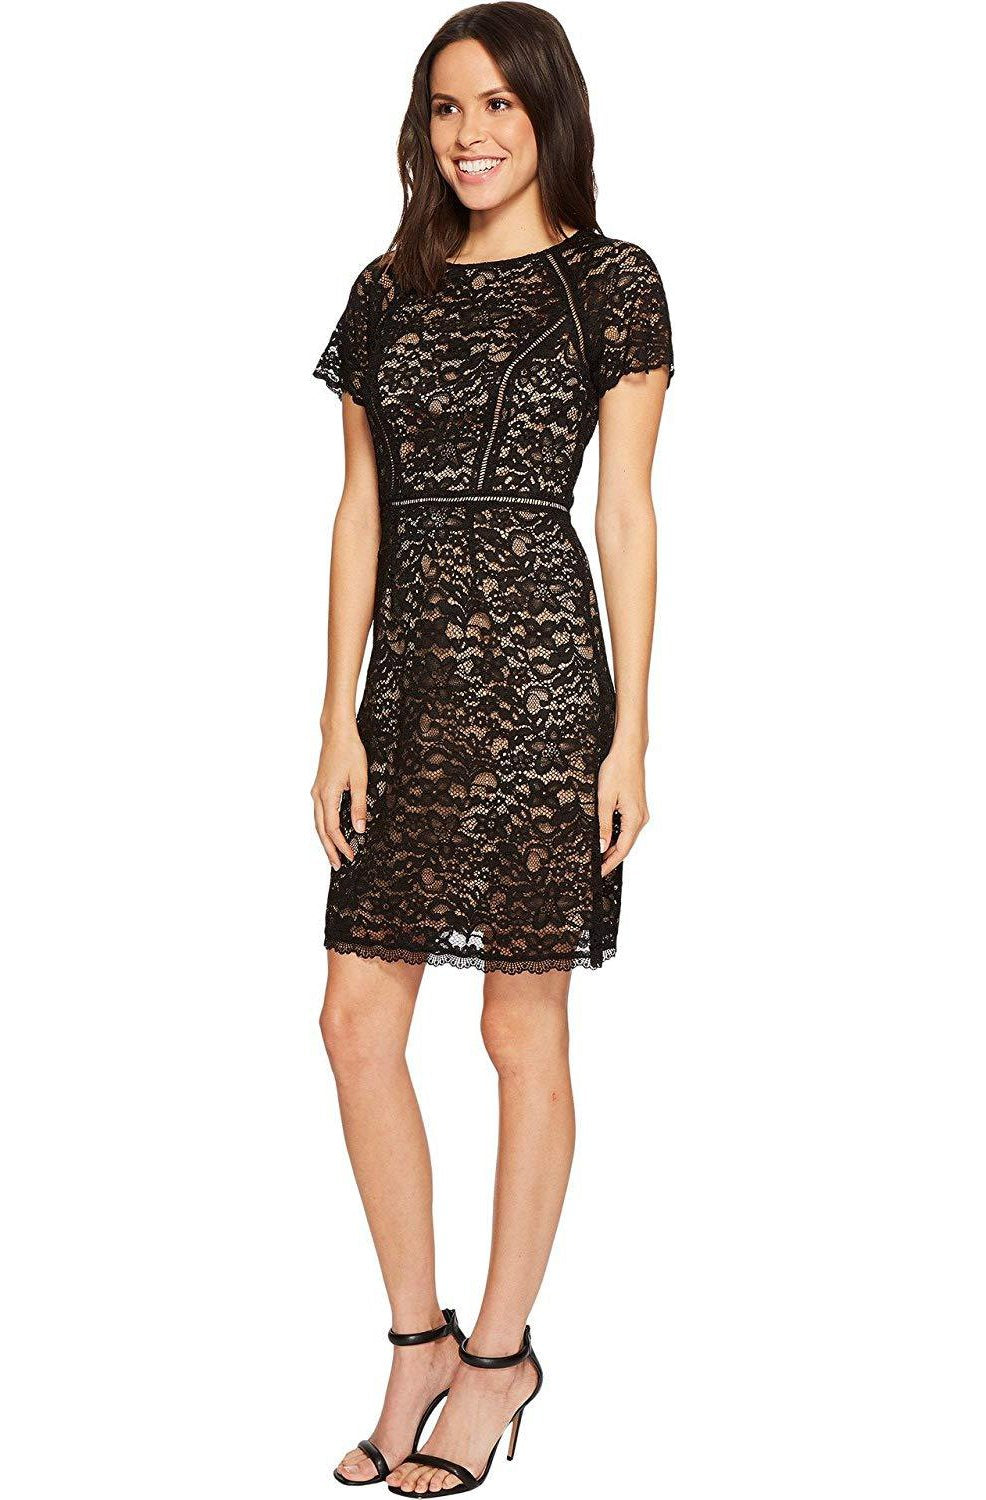 Adrianna Papell - AP1D101817 Lace Illusion Jewel Cocktail Dress In Black and Neutral